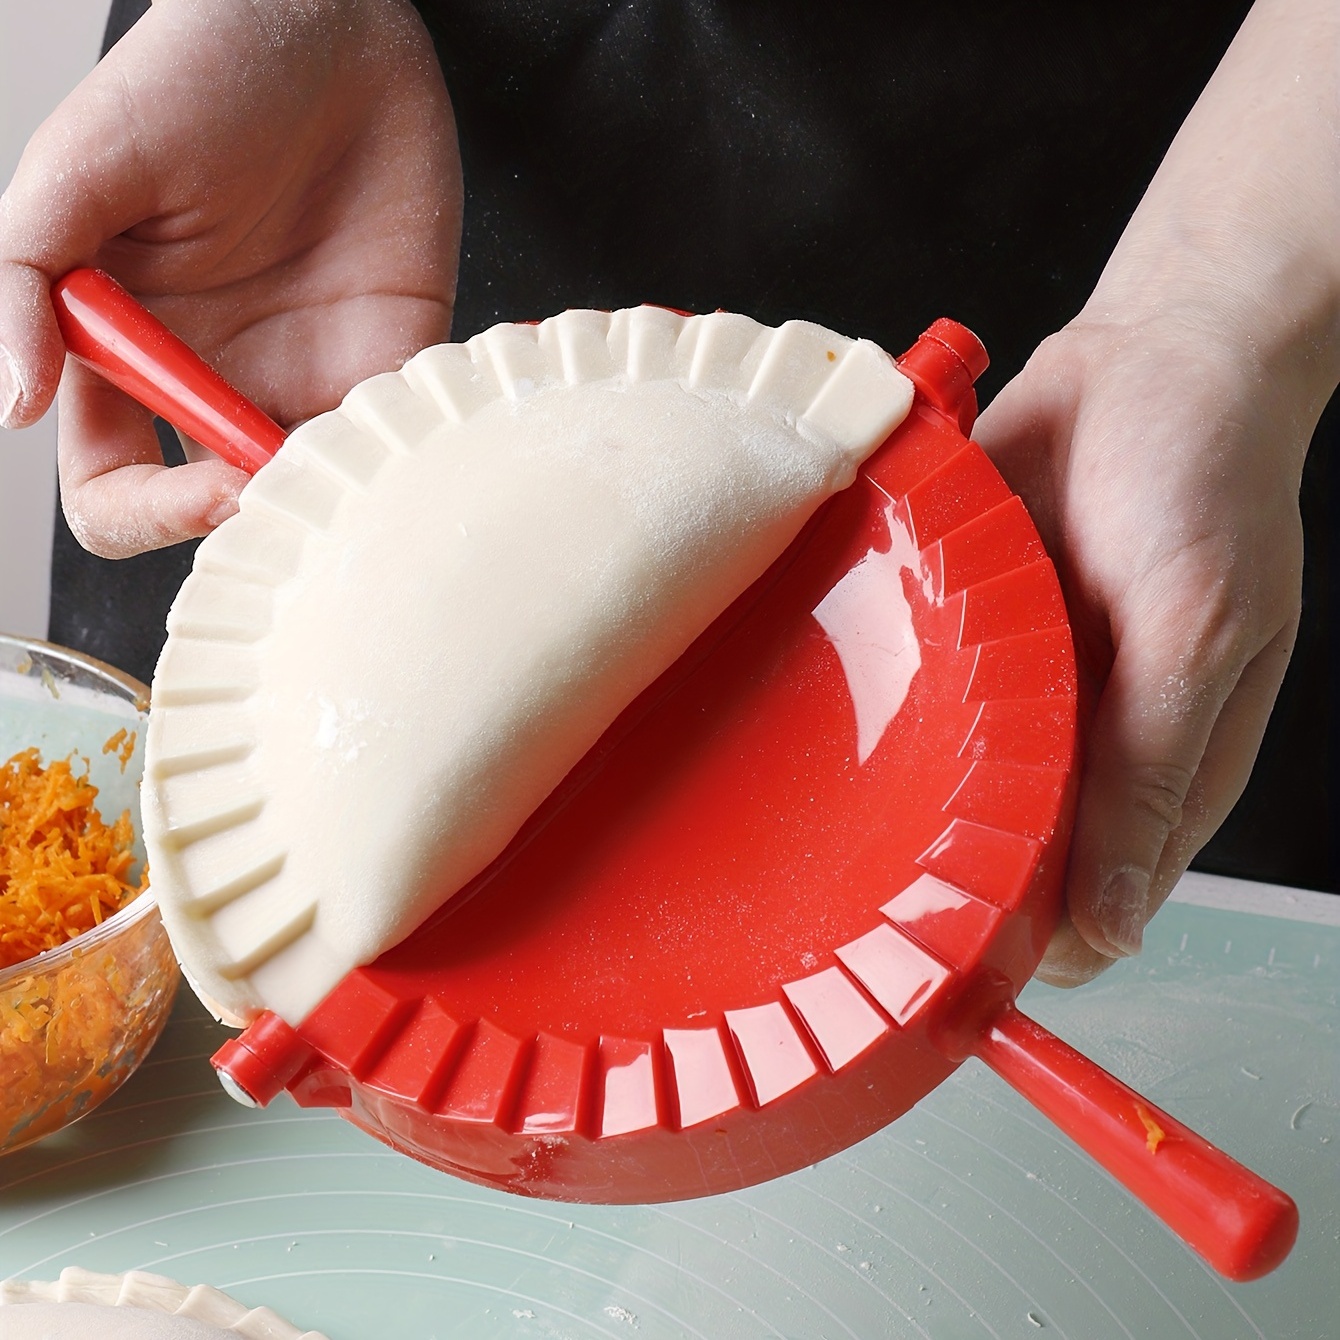 

1pc, Easy-to-use Dumpling Maker - Pp Plastic Dumpling Press For Empanadas, Ravioli, And More - Kitchen Gadget For Homemade Dumplings And Wrappers - Perfect For Home Cooking And Entertaining